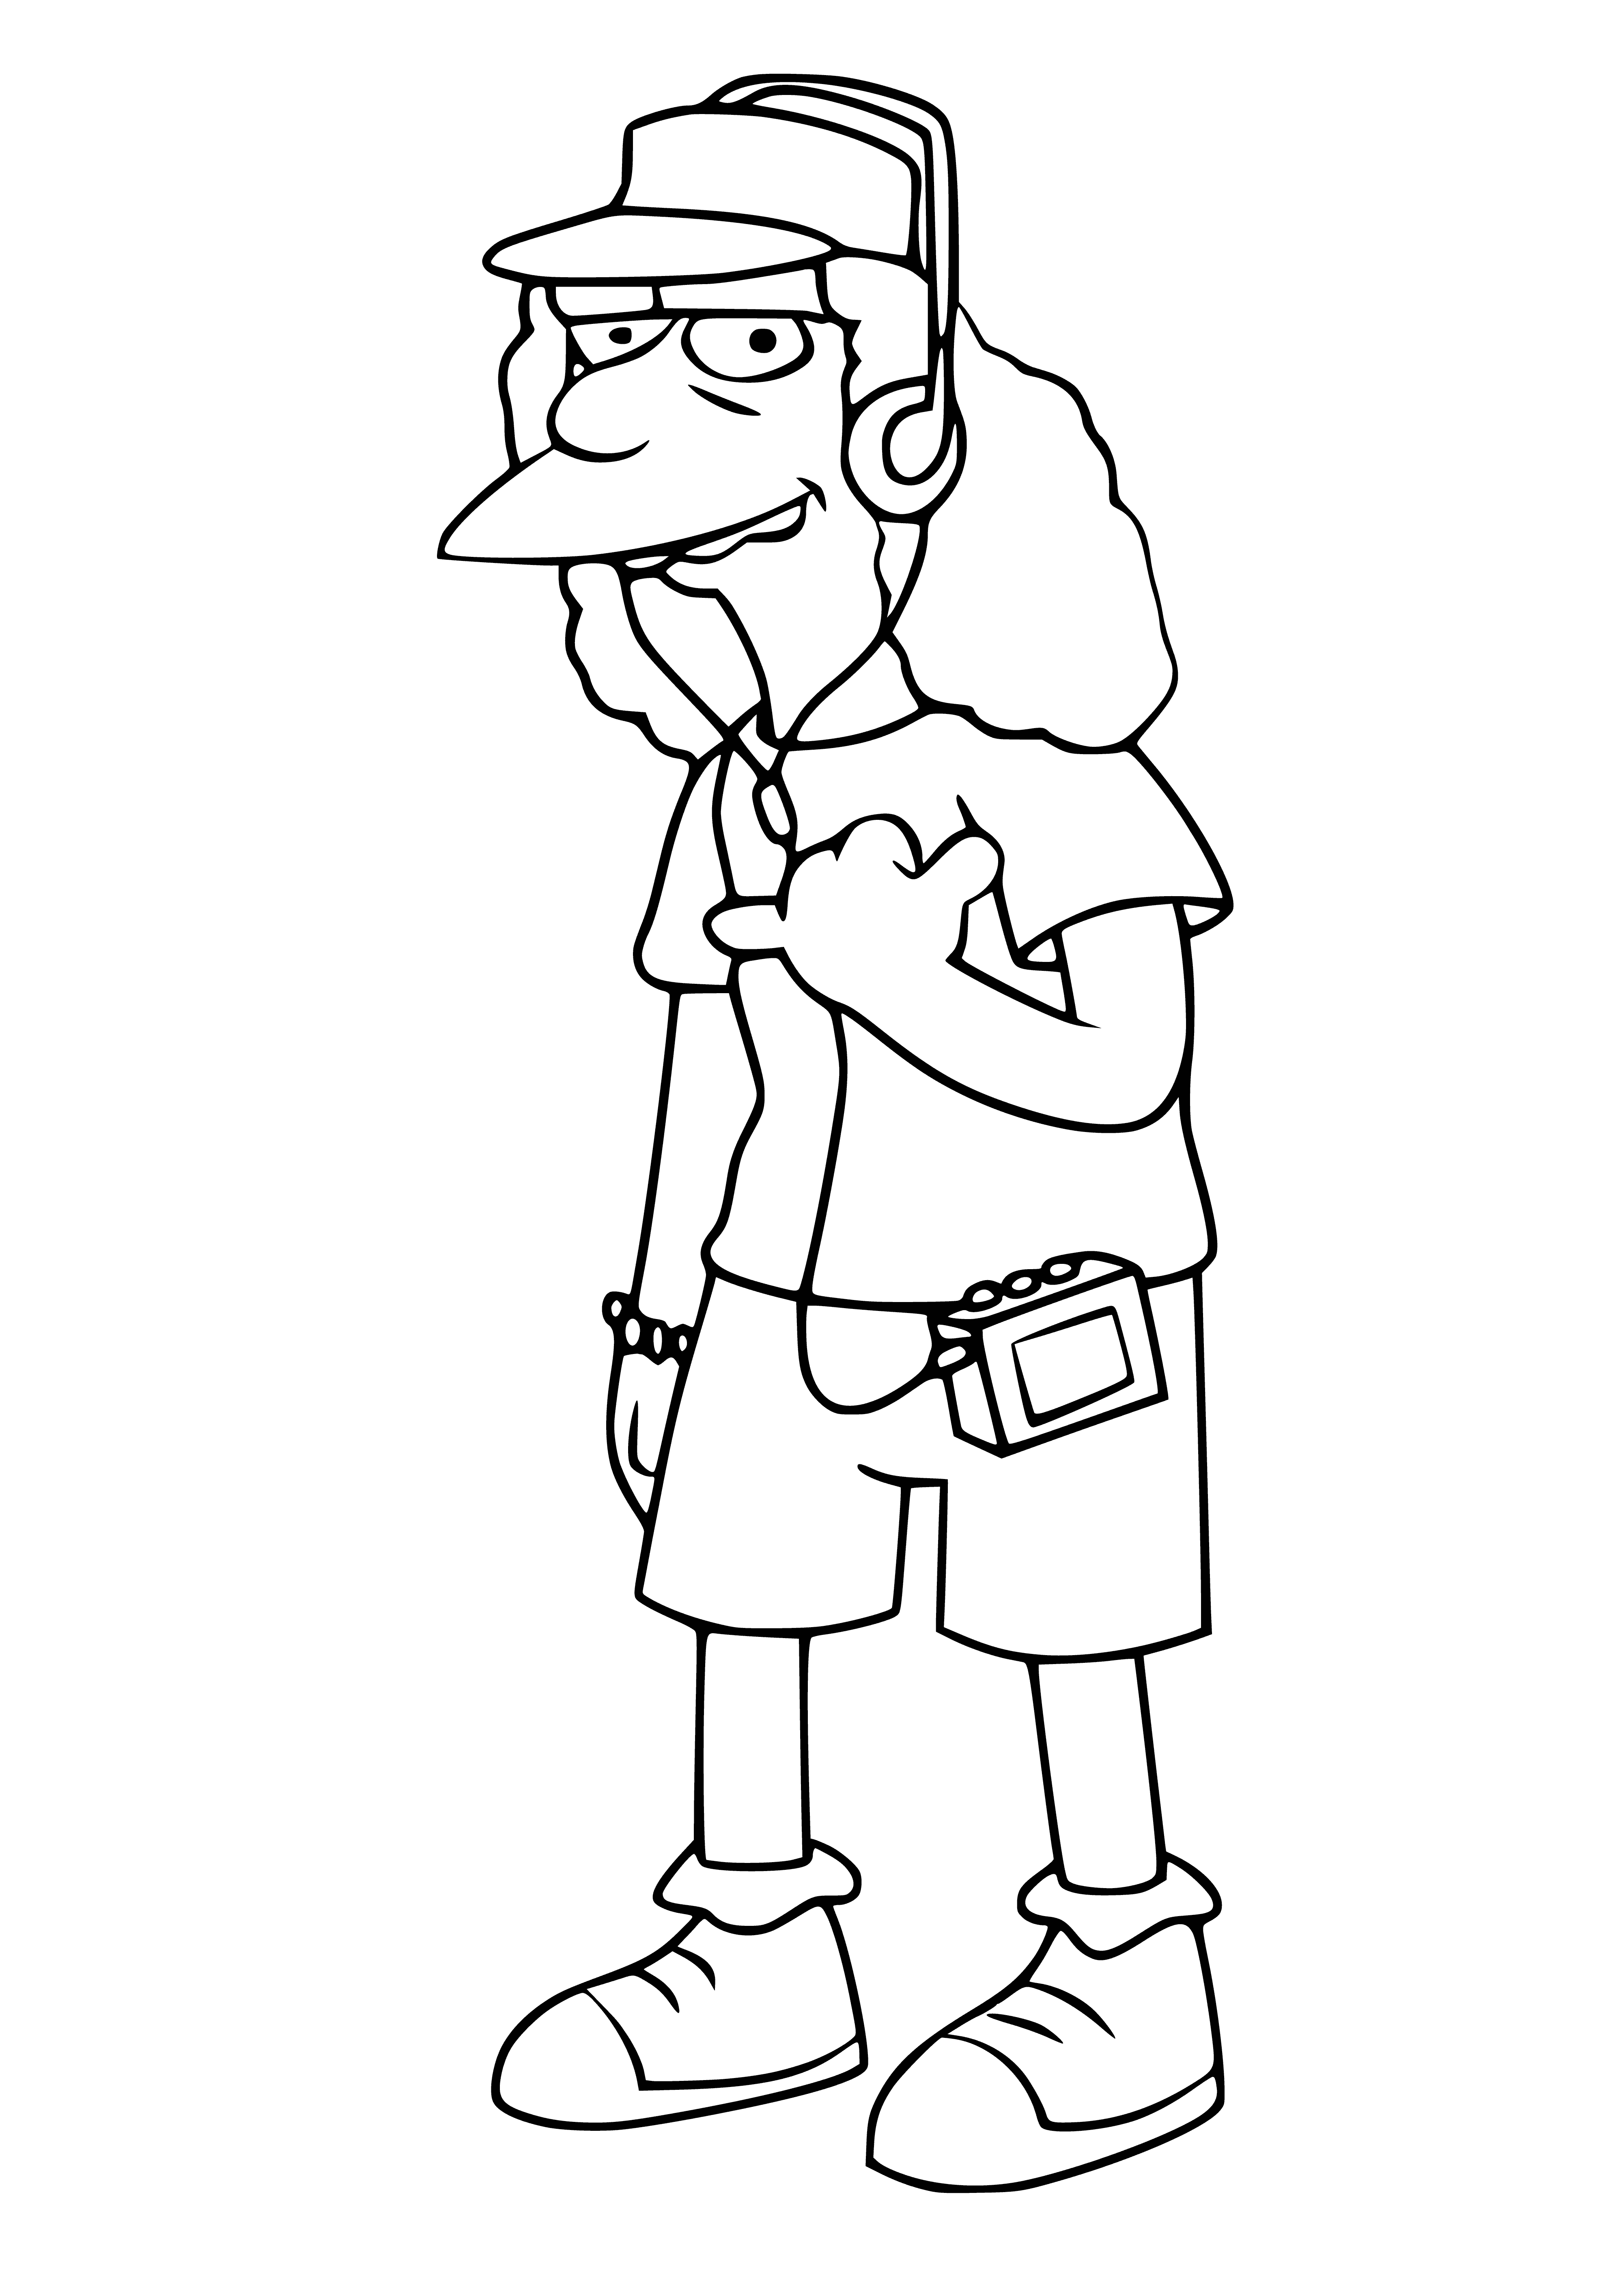 coloring page: Otto Man is The Simpsons' cheerful, optimistic German immigrant bus driver who often gets into trouble.